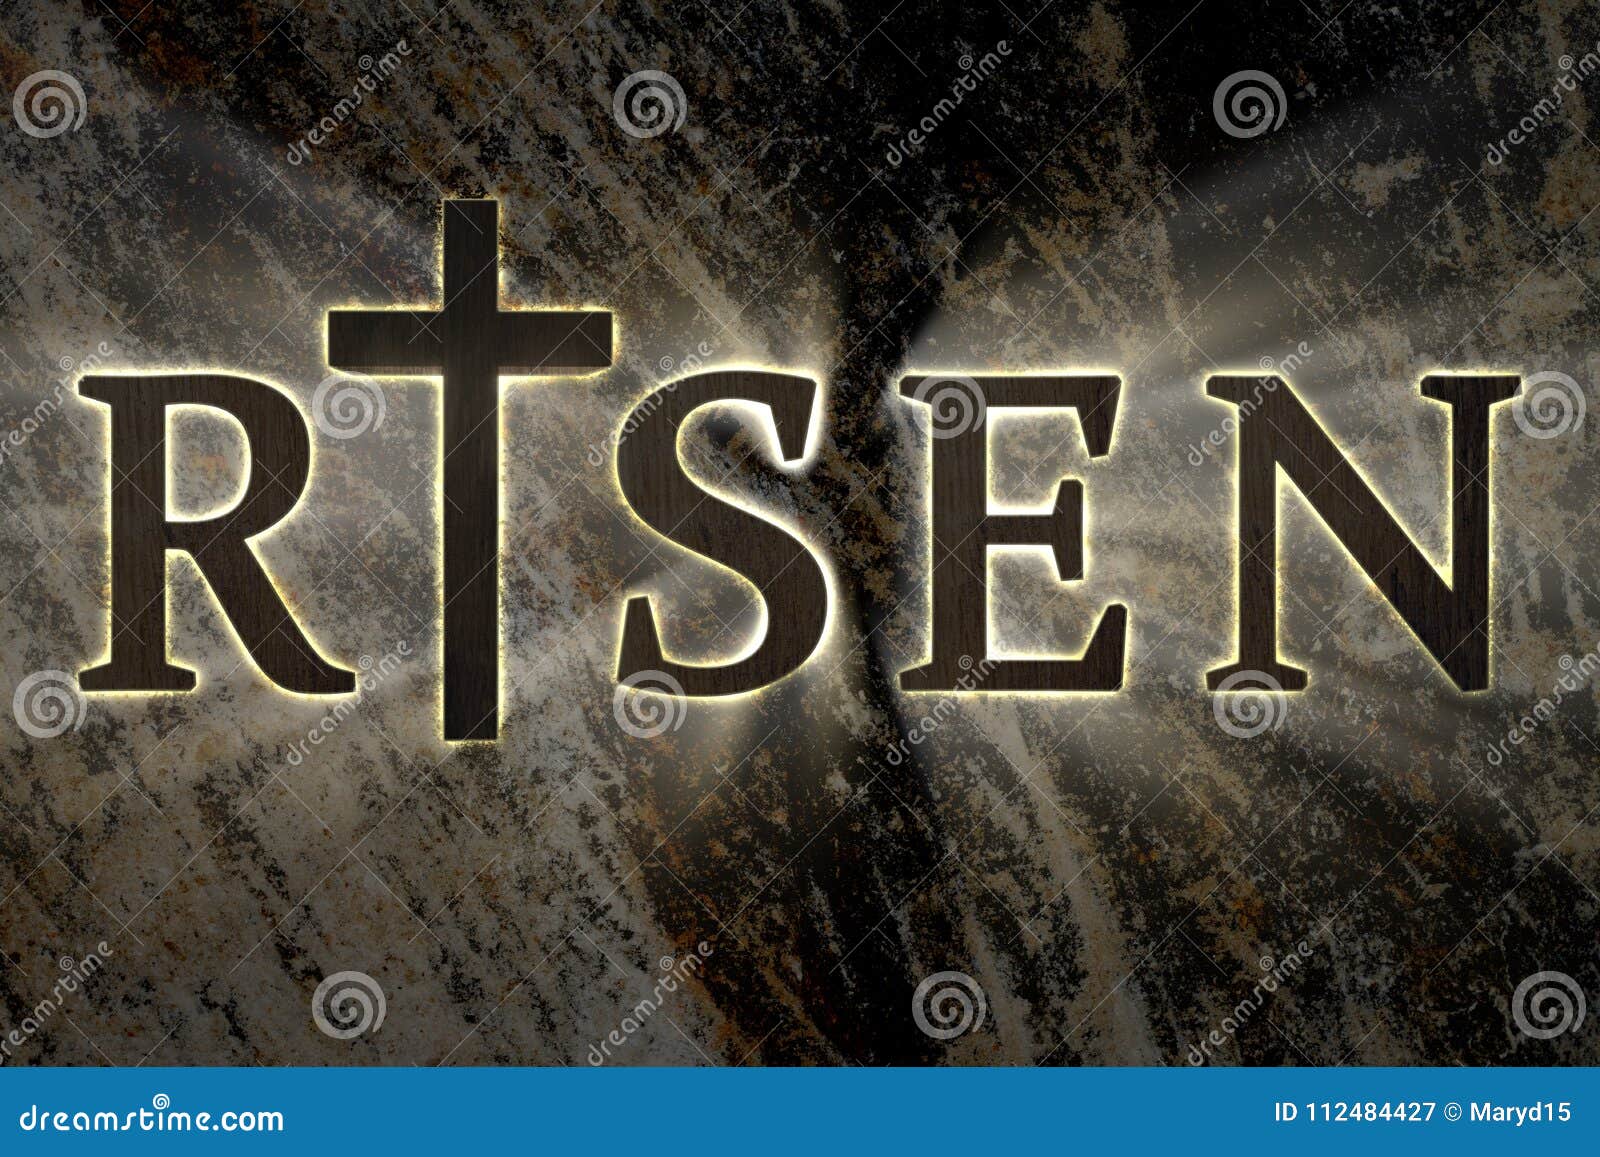 Easter Background with Wooden Jesus Christ Cross and Risen Text ...